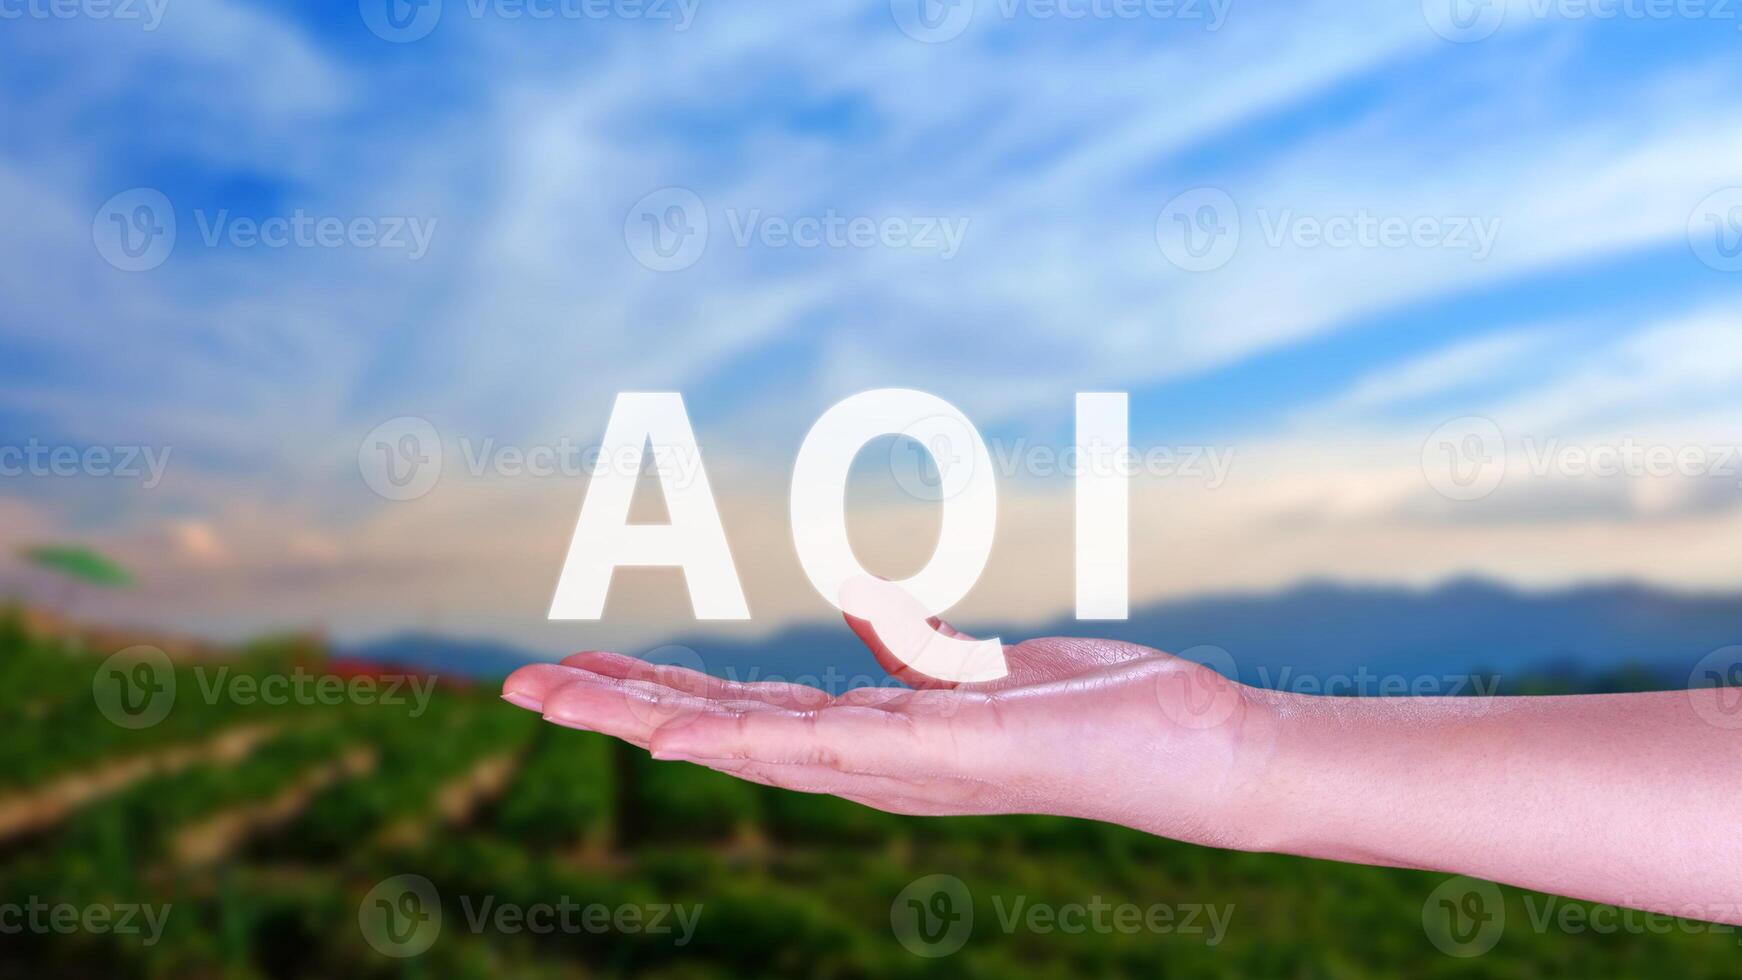 AQI, Abbreviation of air quality index, hand holding AQI on nature background, environment concept. photo